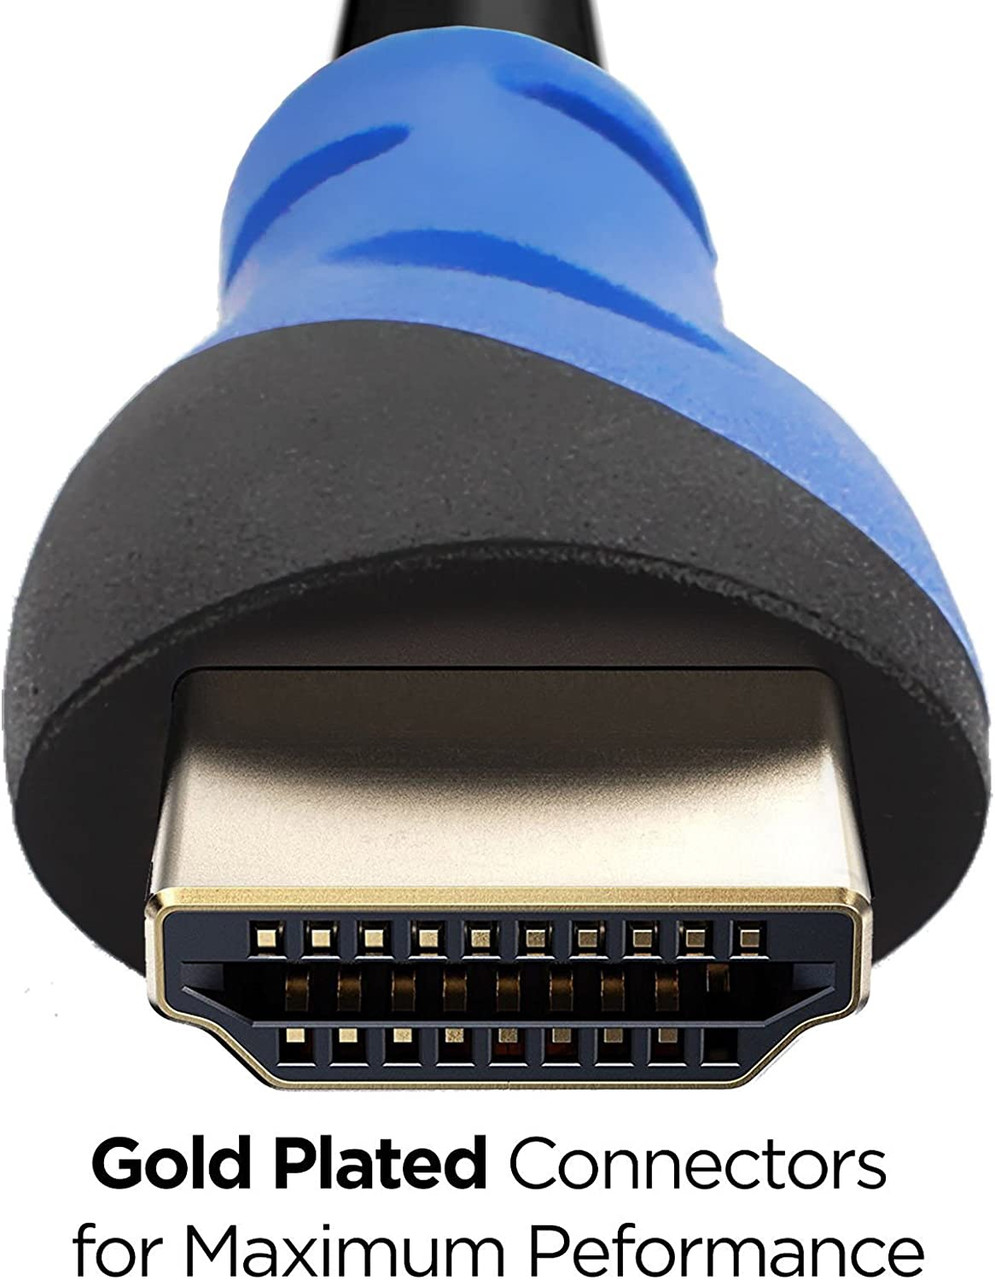 HDMI Cable 75 FEET, V1.4 Ultra-High Speed Supports Ethernet Audio Return (ARC) Bandwidth up to 18Gbps 3D HD 1080p Ready 75ft Braided Nylon Cable Cord Gold Plated Blue